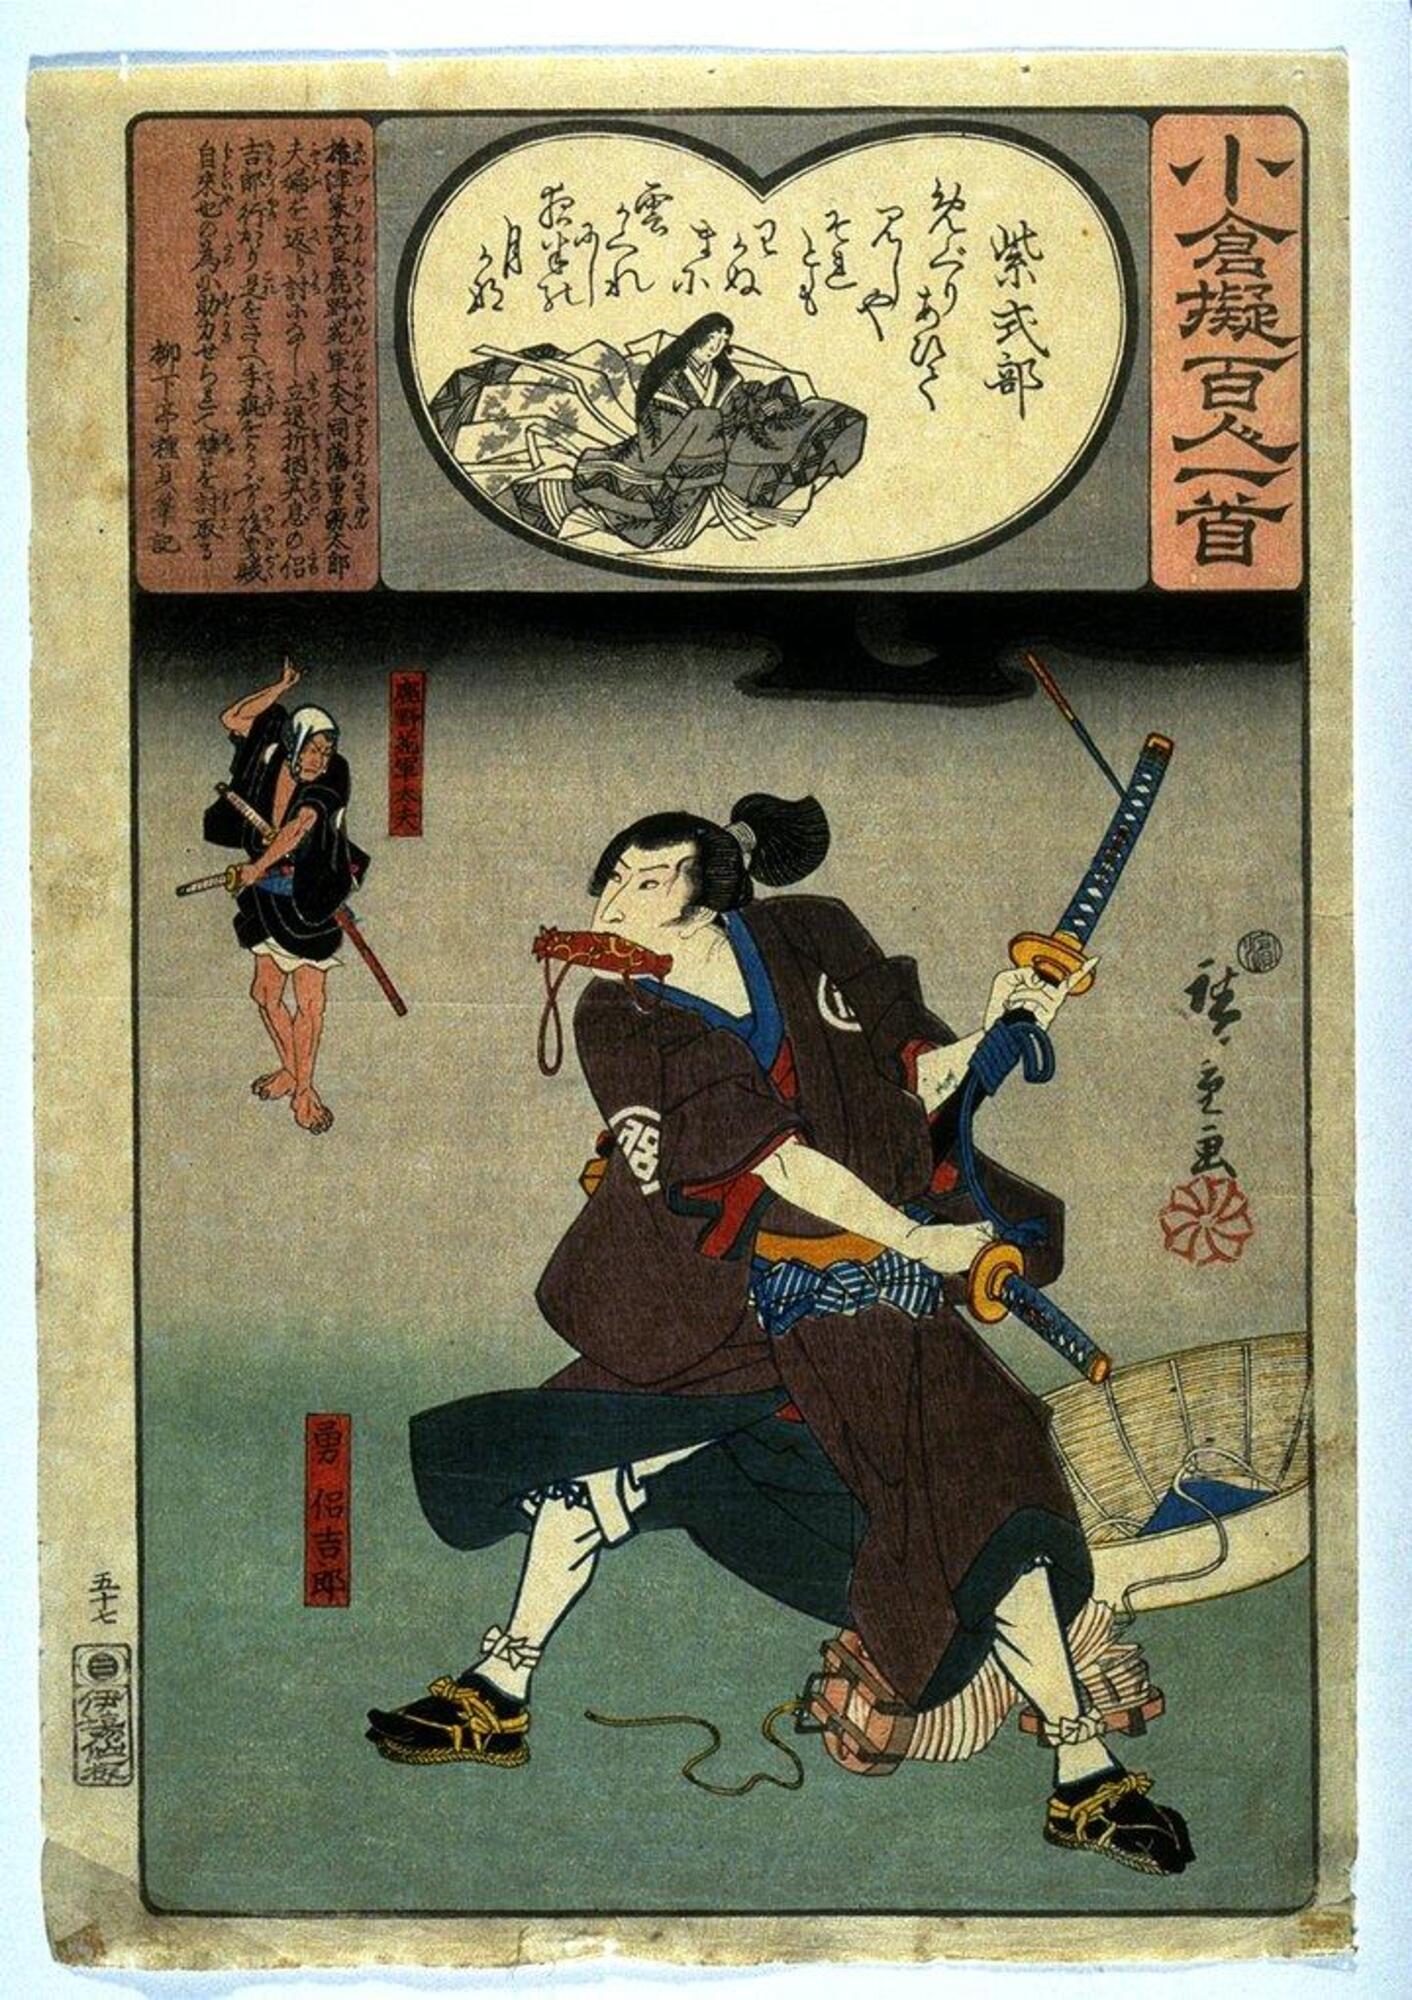 According to the colophon, the figures depicted in the lower part of the print are two samurai of Aizu; the large figure in the front is Isamu Sôkichirô, who has challenged the figure in the rear, Rokuya Ongun Taiyu, to a vendetta.